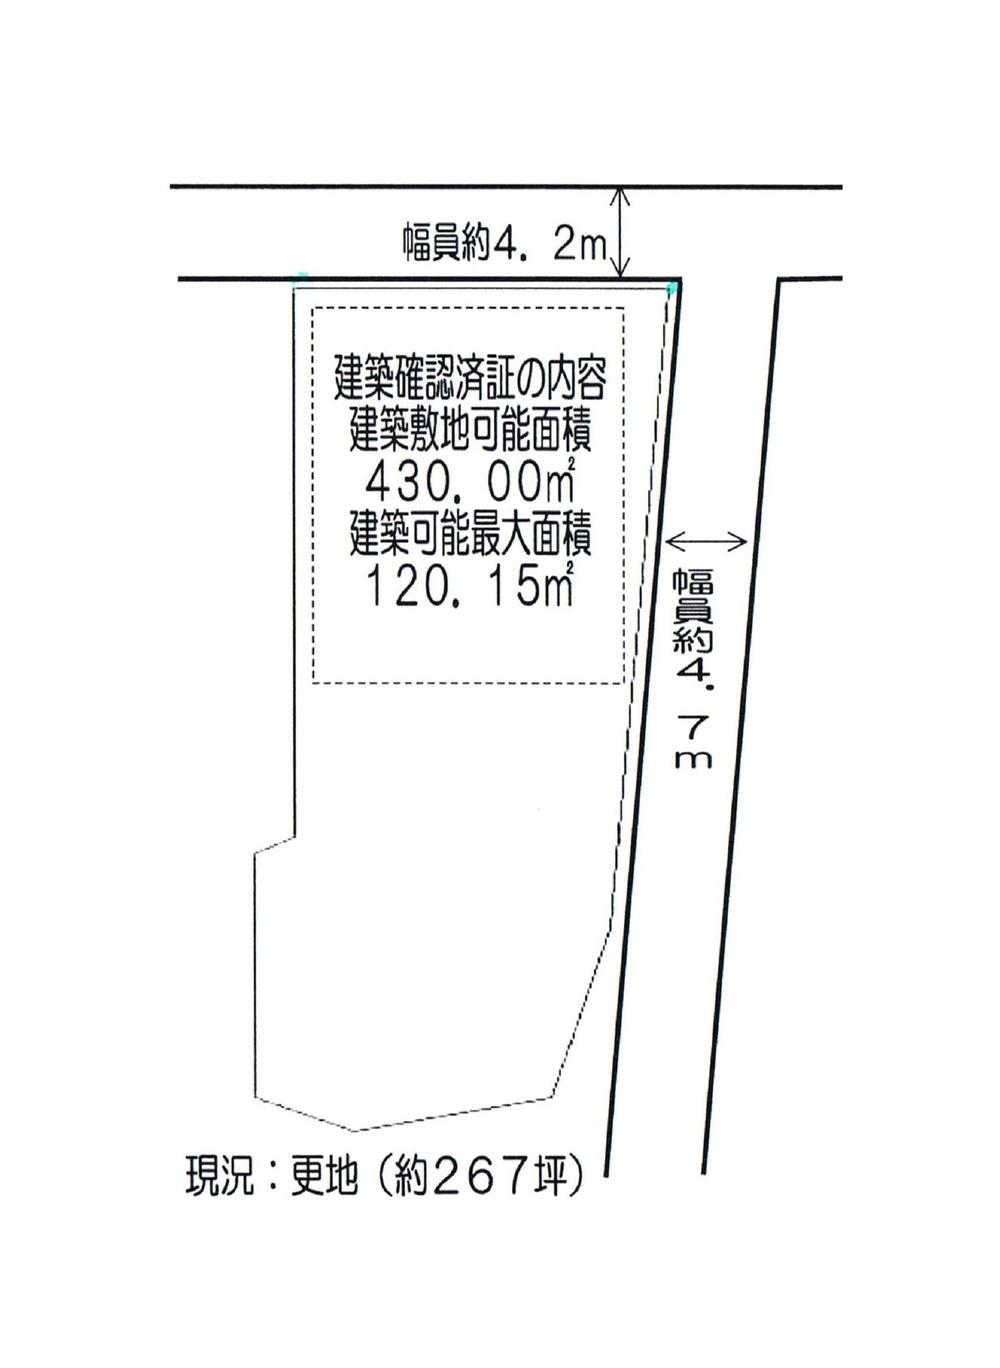 Other. Building confirmation Submitted  ☆ Building maximum area: 120.15 sq m (about 36.30 square meters)  ☆ Building site area: 430.00 sq m (about 130 square meters)  ※ The contents of the confirmed certificate of, It can be changed by re-apply. Also the current 120.15 sq m will be the upper limit of the maximum land area at that time. 